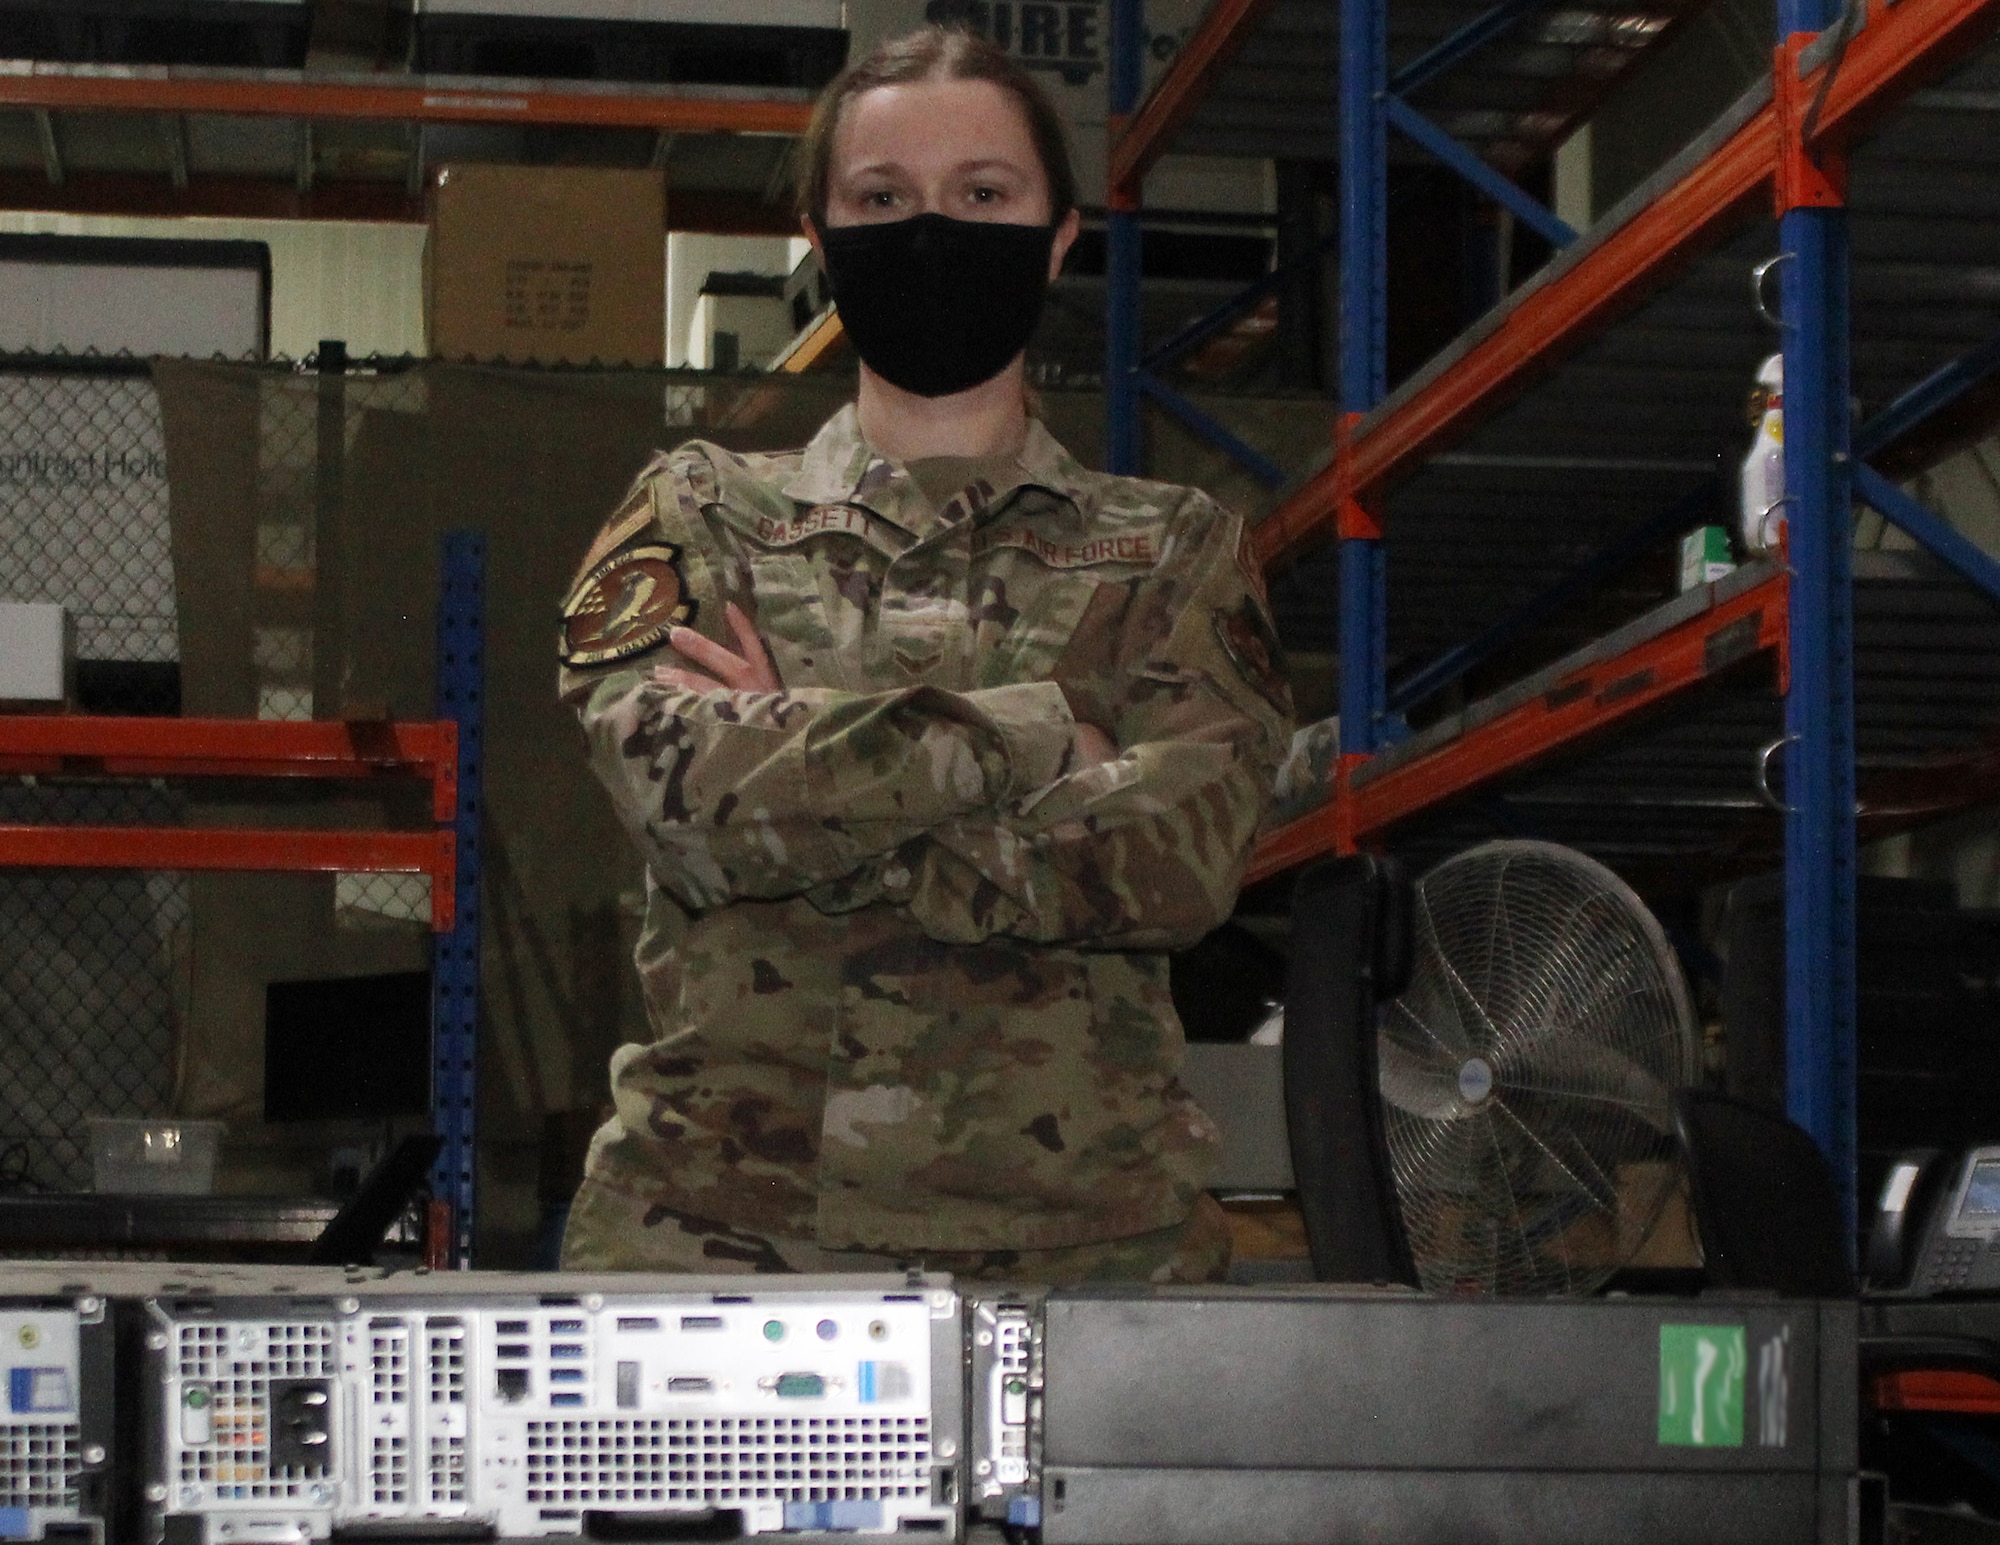 Airman 1st Class Hailey Gassett stands with old computer systems at the Base Equipment Control Office warehouse at Al Dhafra Air Base, Dec. 30, 2021. Gassett and the Airmen of the BECO shop are responsible for the inventory and, when necessary, disposal of all computer systems at the base. (U.S. Air Force photo by Master Sgt. Dan Heaton)